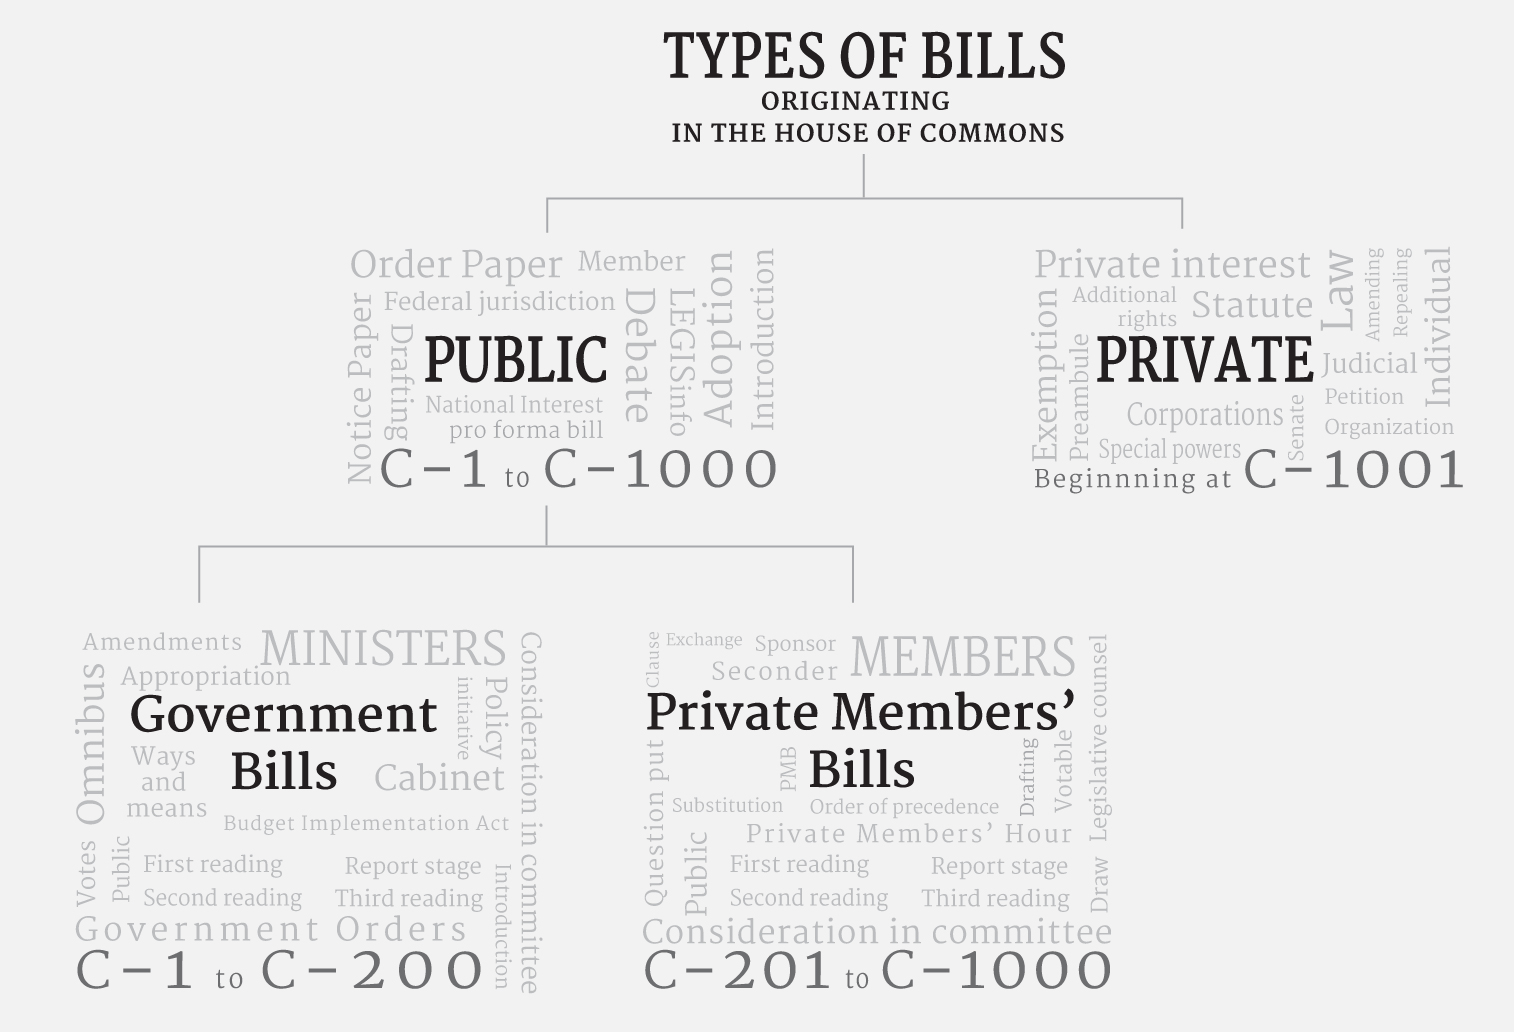 There are two main categories of bills: public bills and private bills. Public bills initiated by a minister are referred to as government bills and are numbered from C-1 to C-200. Public bills initiated by private members are called private members’ bills and are numbered from C-201 to C-1000. Private bills are numbered beginning at C-1001.